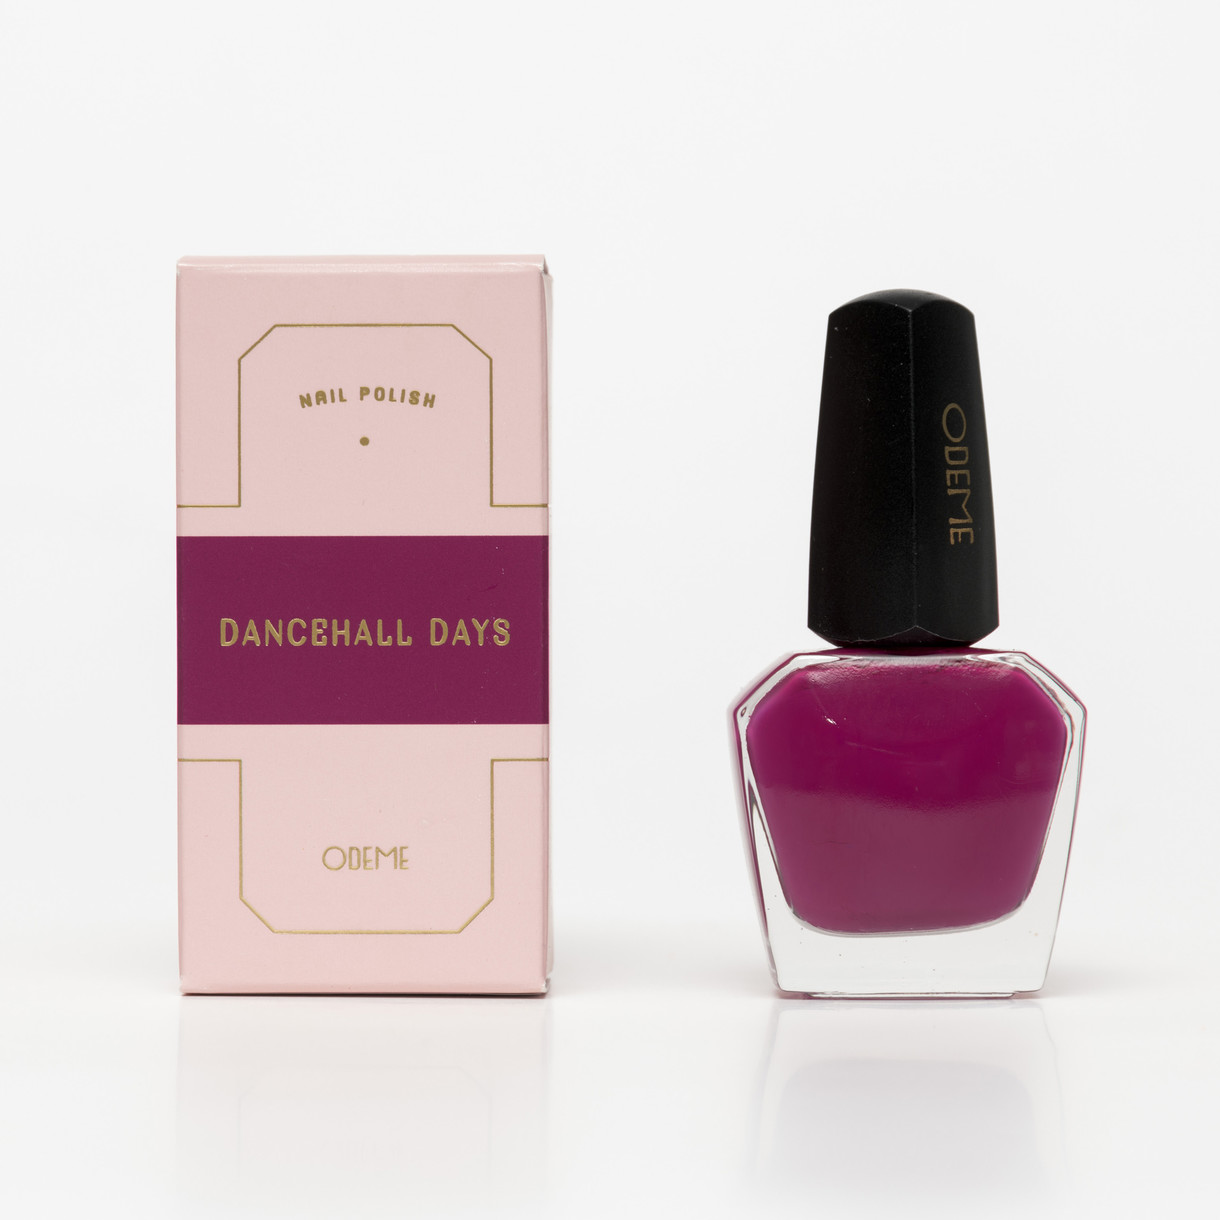 Odeme Nail Polish - Dancehall Days SOLD OUT